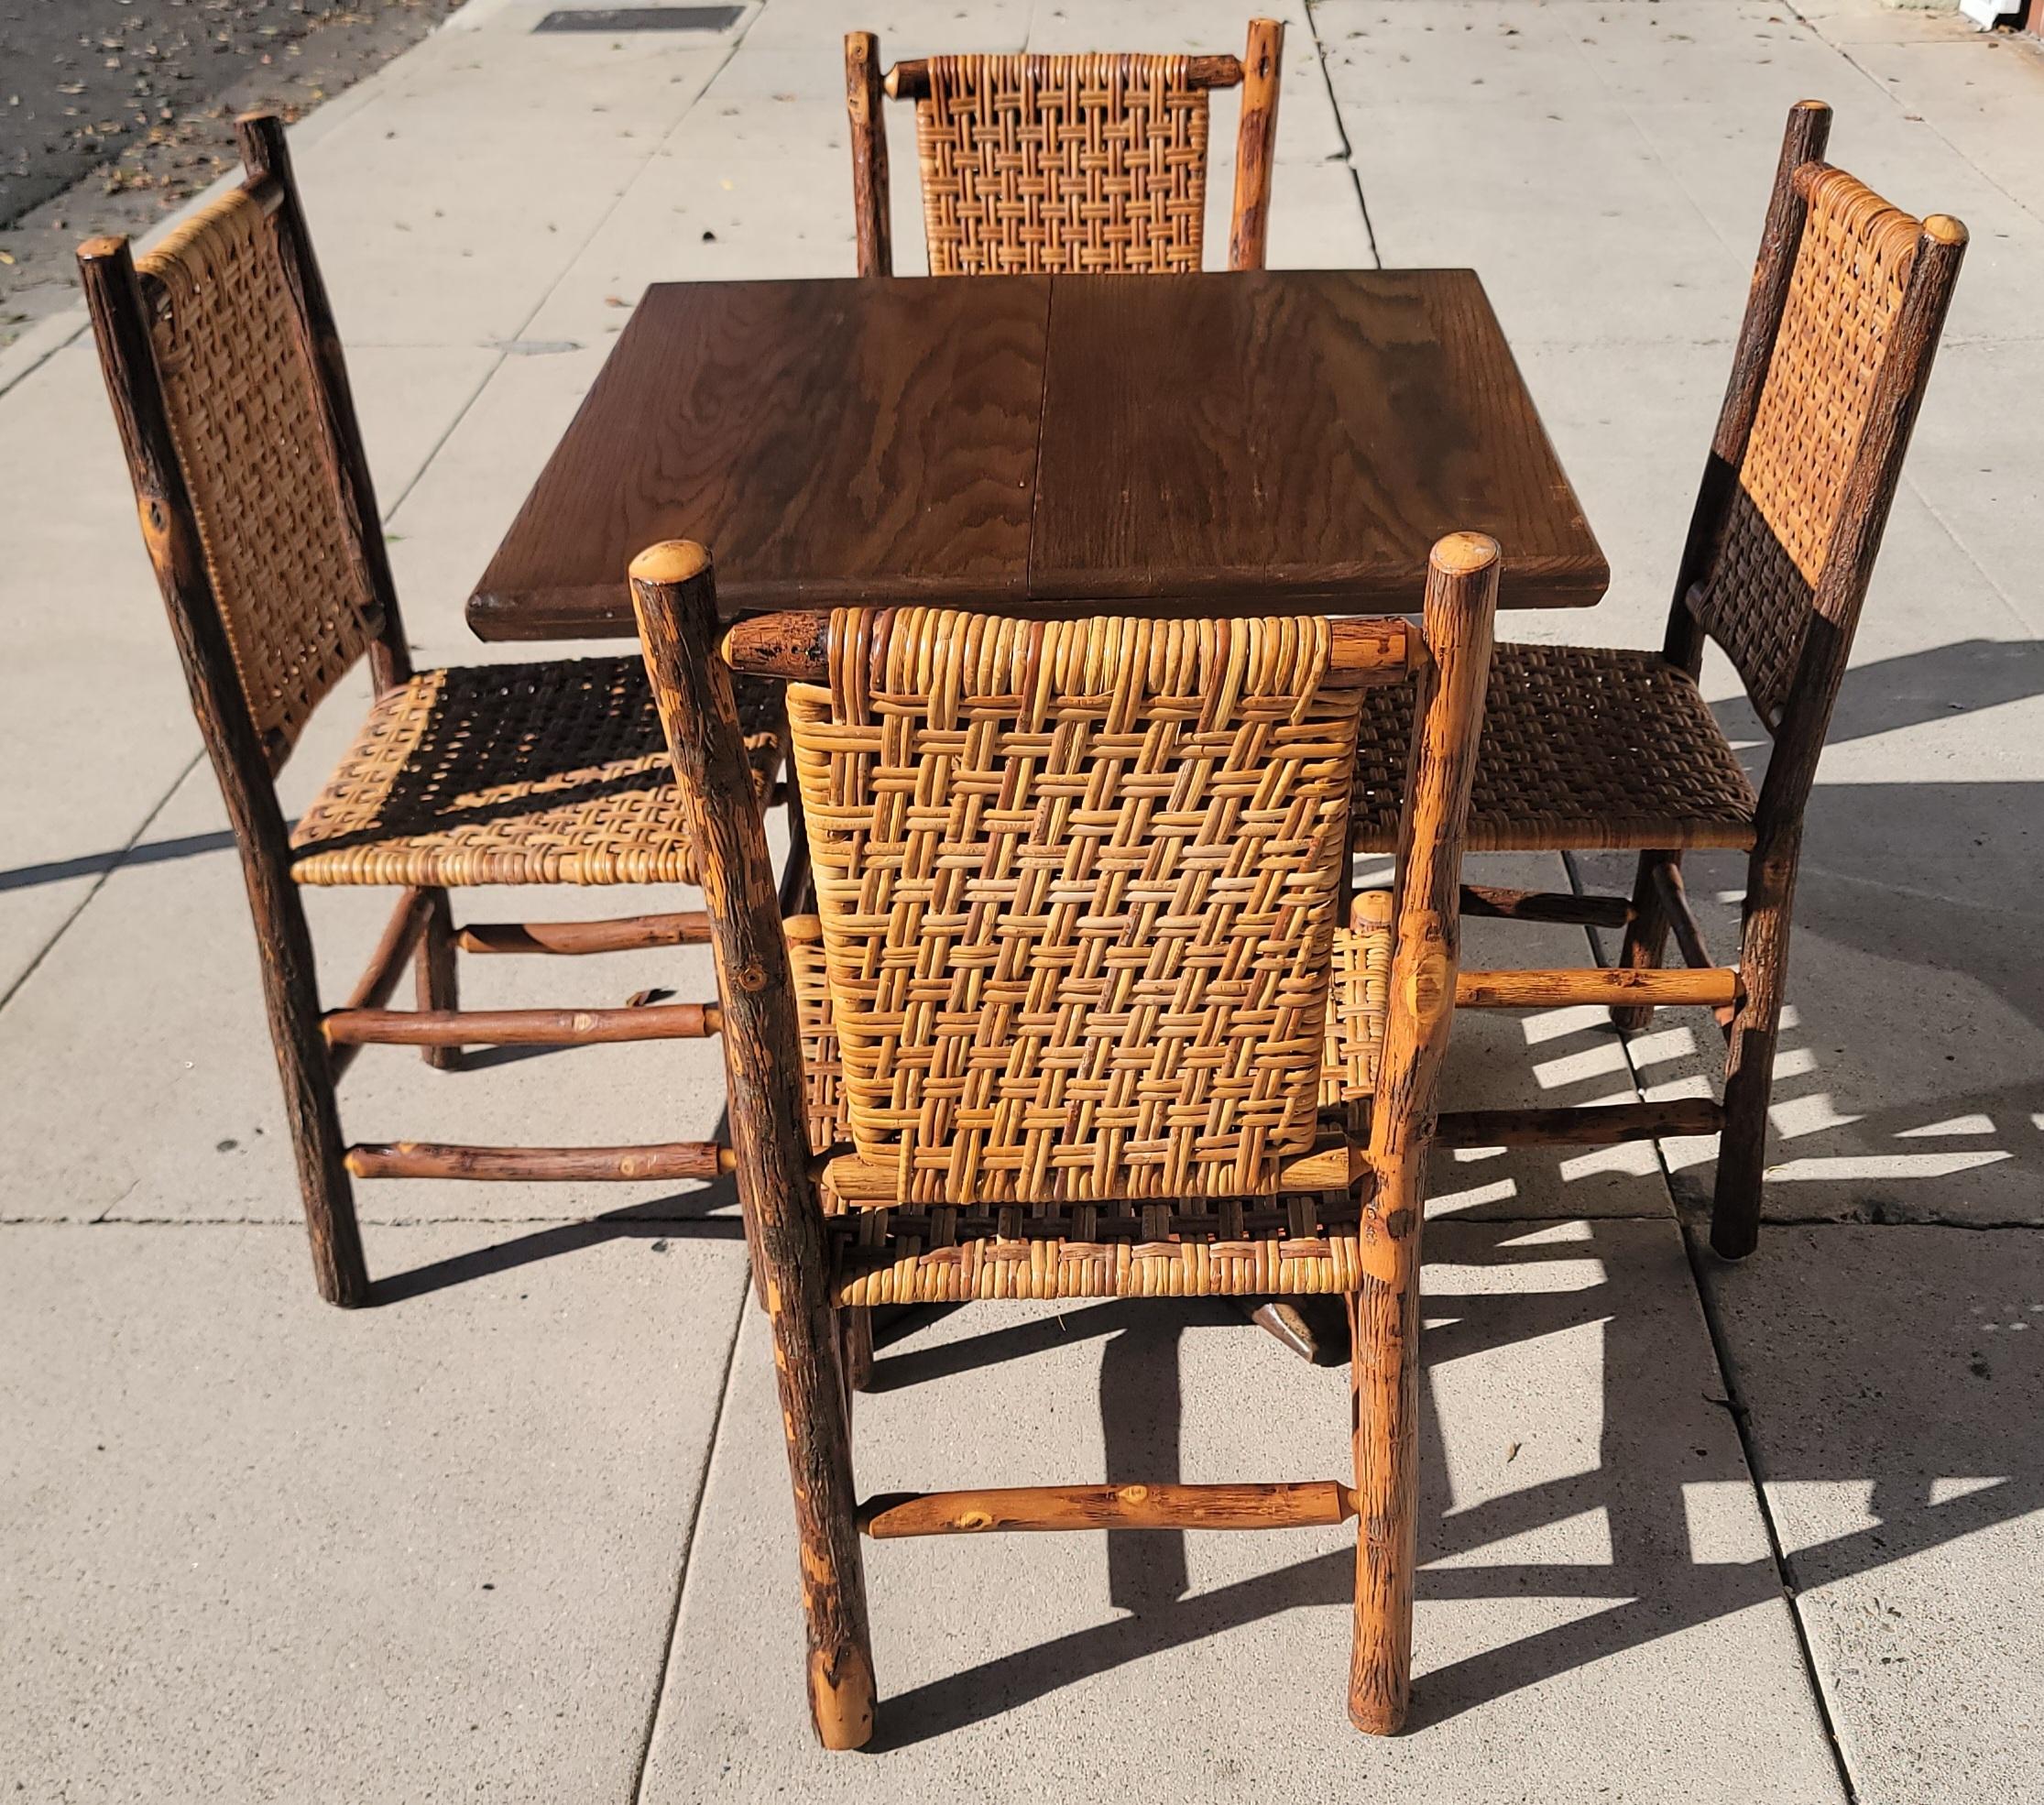 American Old Hickory Table and Chairs, Five Piece Collection